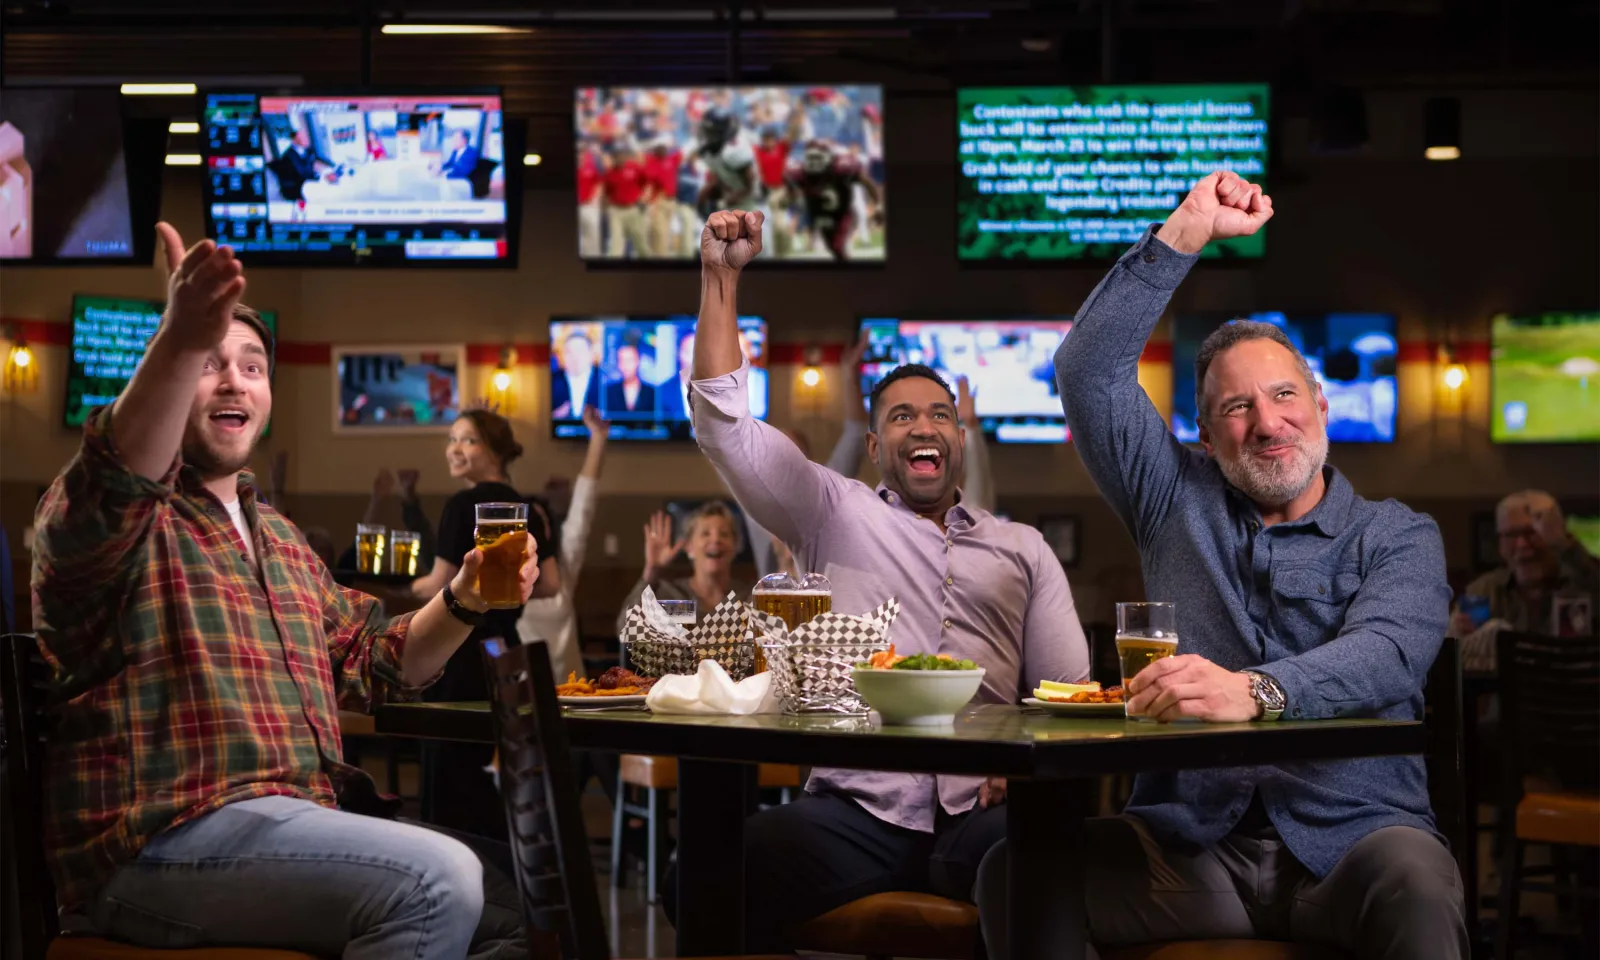 3 men cheering at a table with food and beer with TVs playing in the background